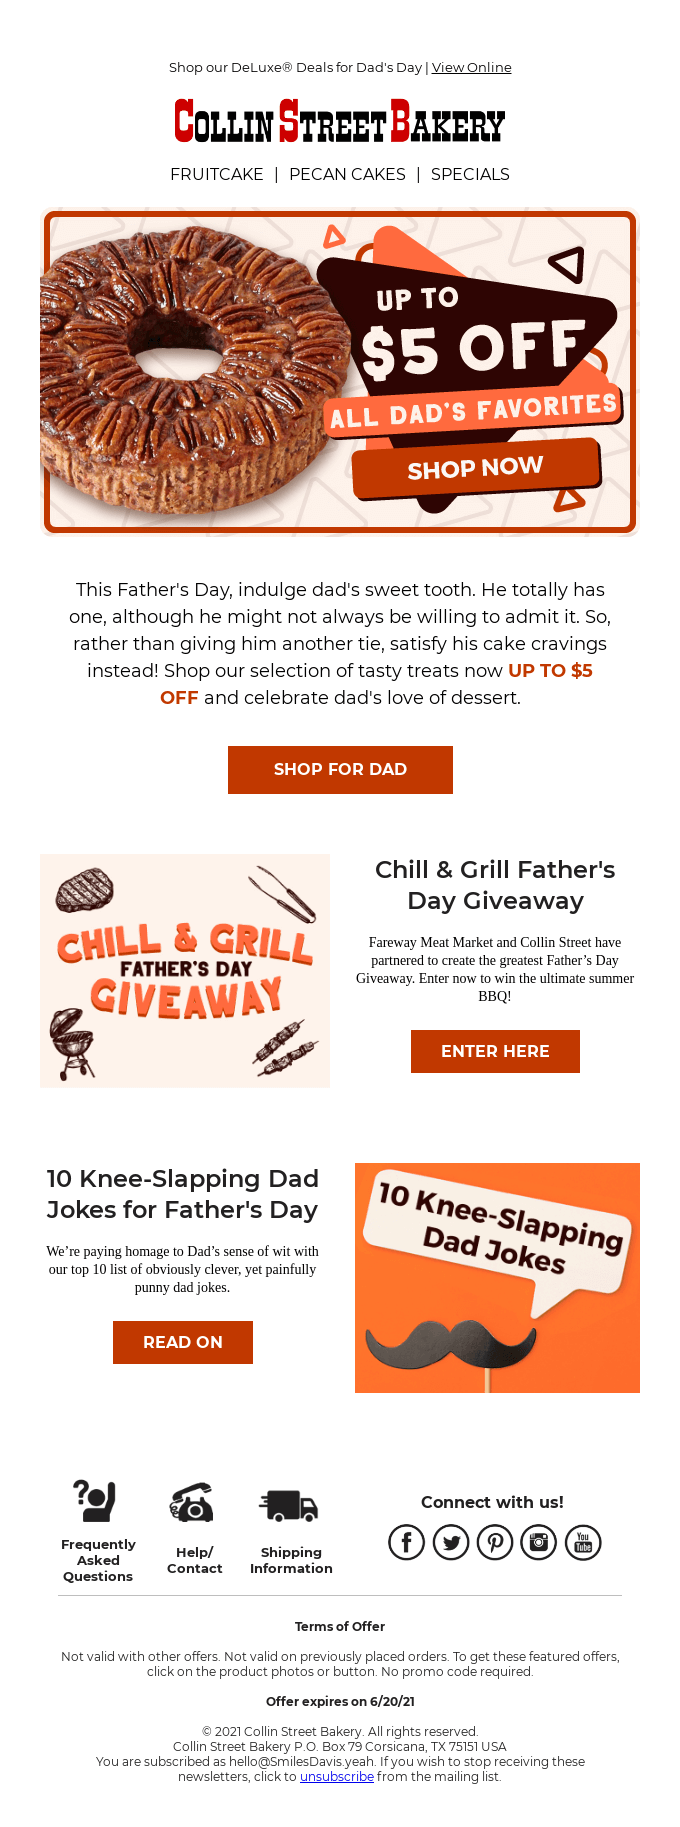 TAKE $5 OFF for Father's Day